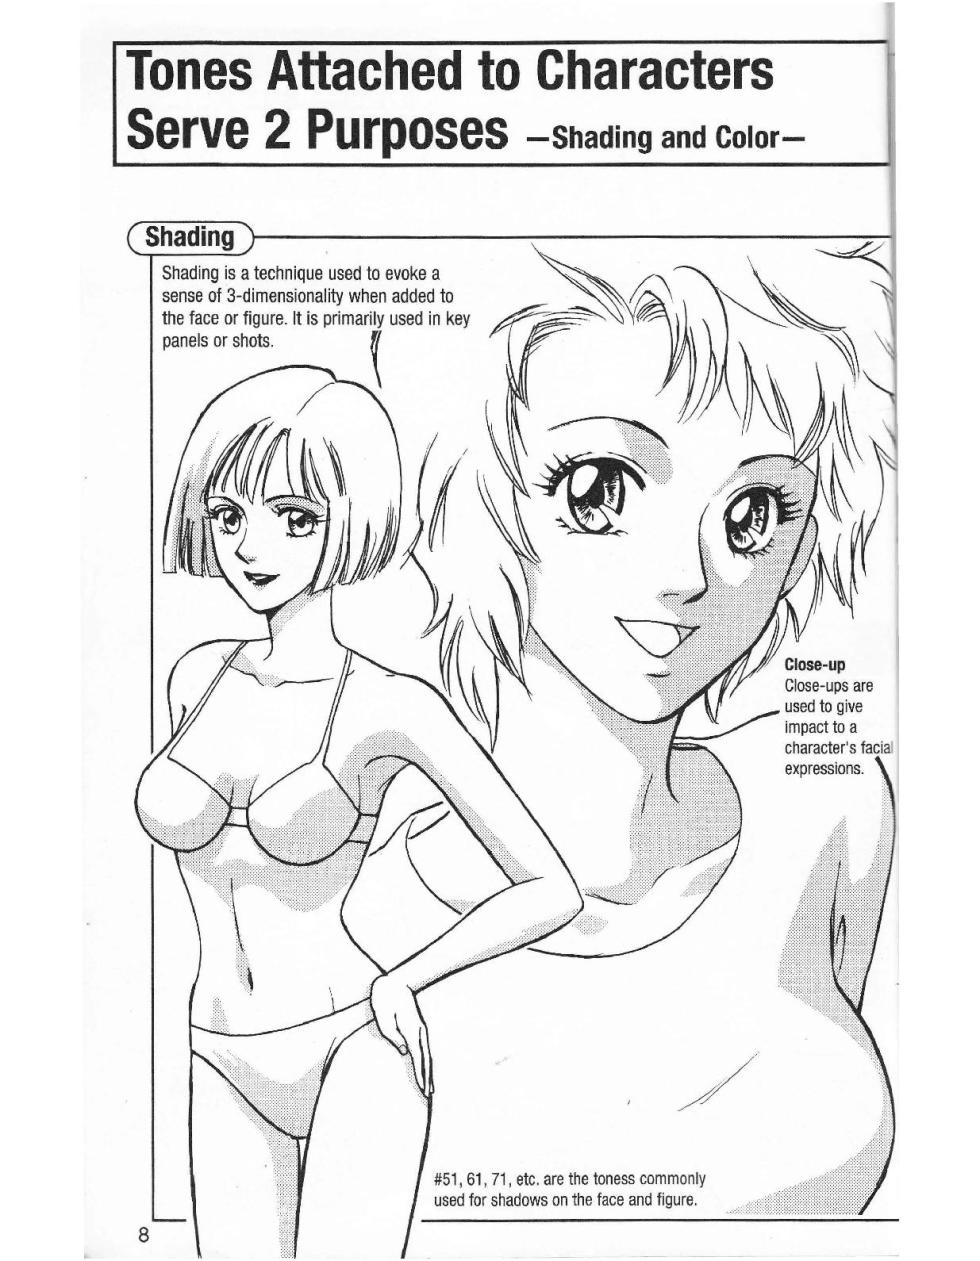 More How to Draw Manga Vol. 3 - Enhancing a Character's Sense of Presence - Page 10